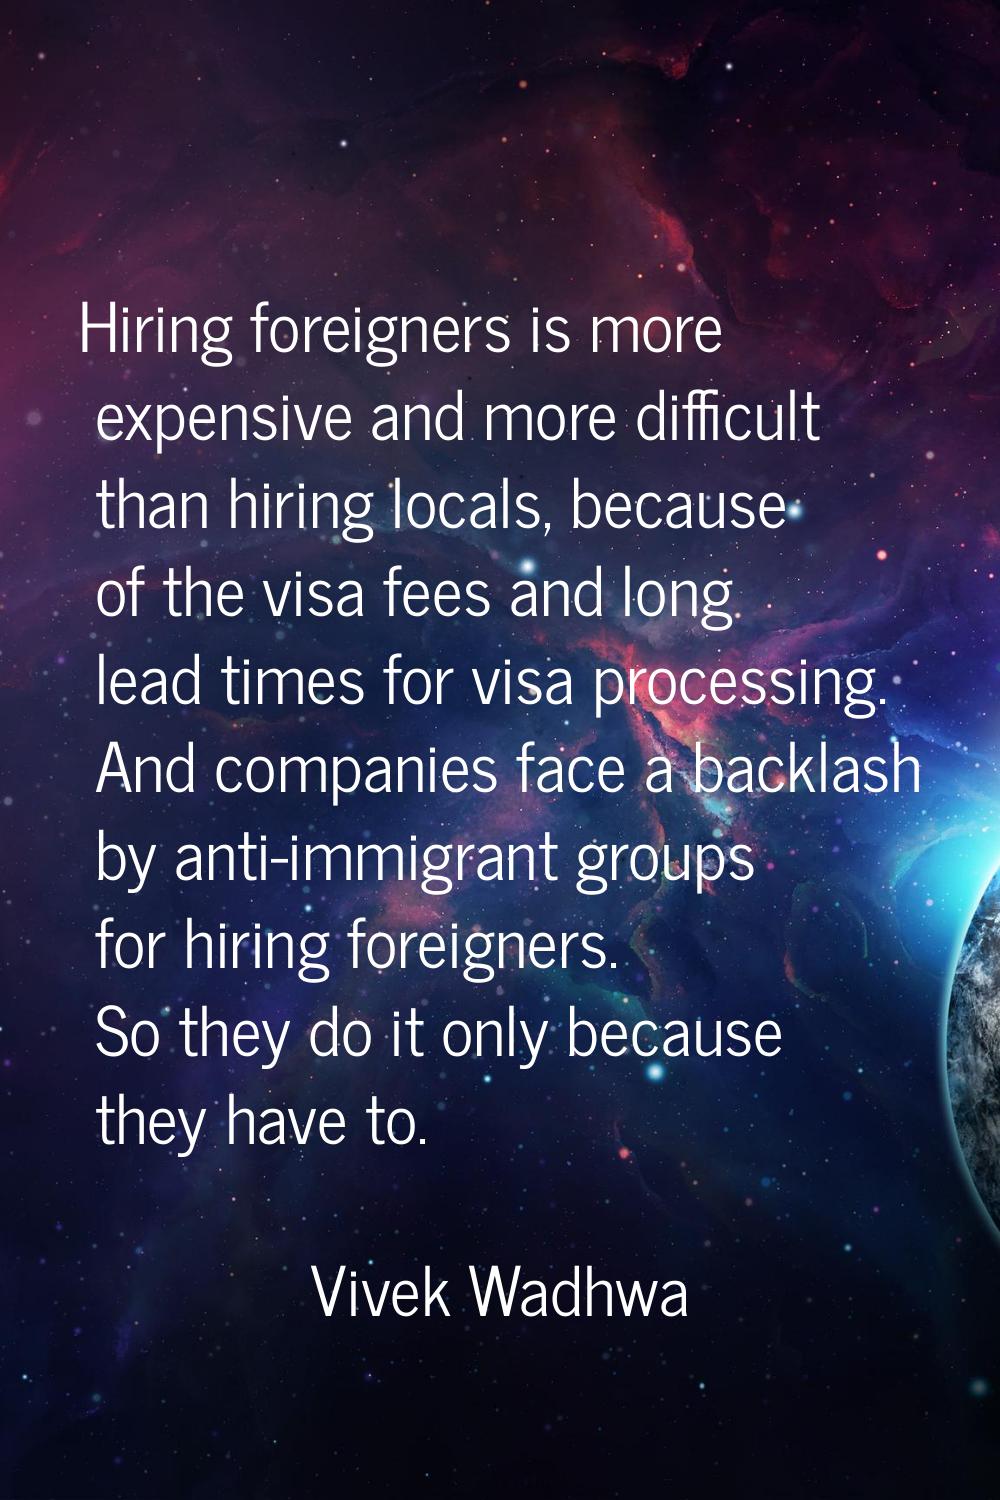 Hiring foreigners is more expensive and more difficult than hiring locals, because of the visa fees